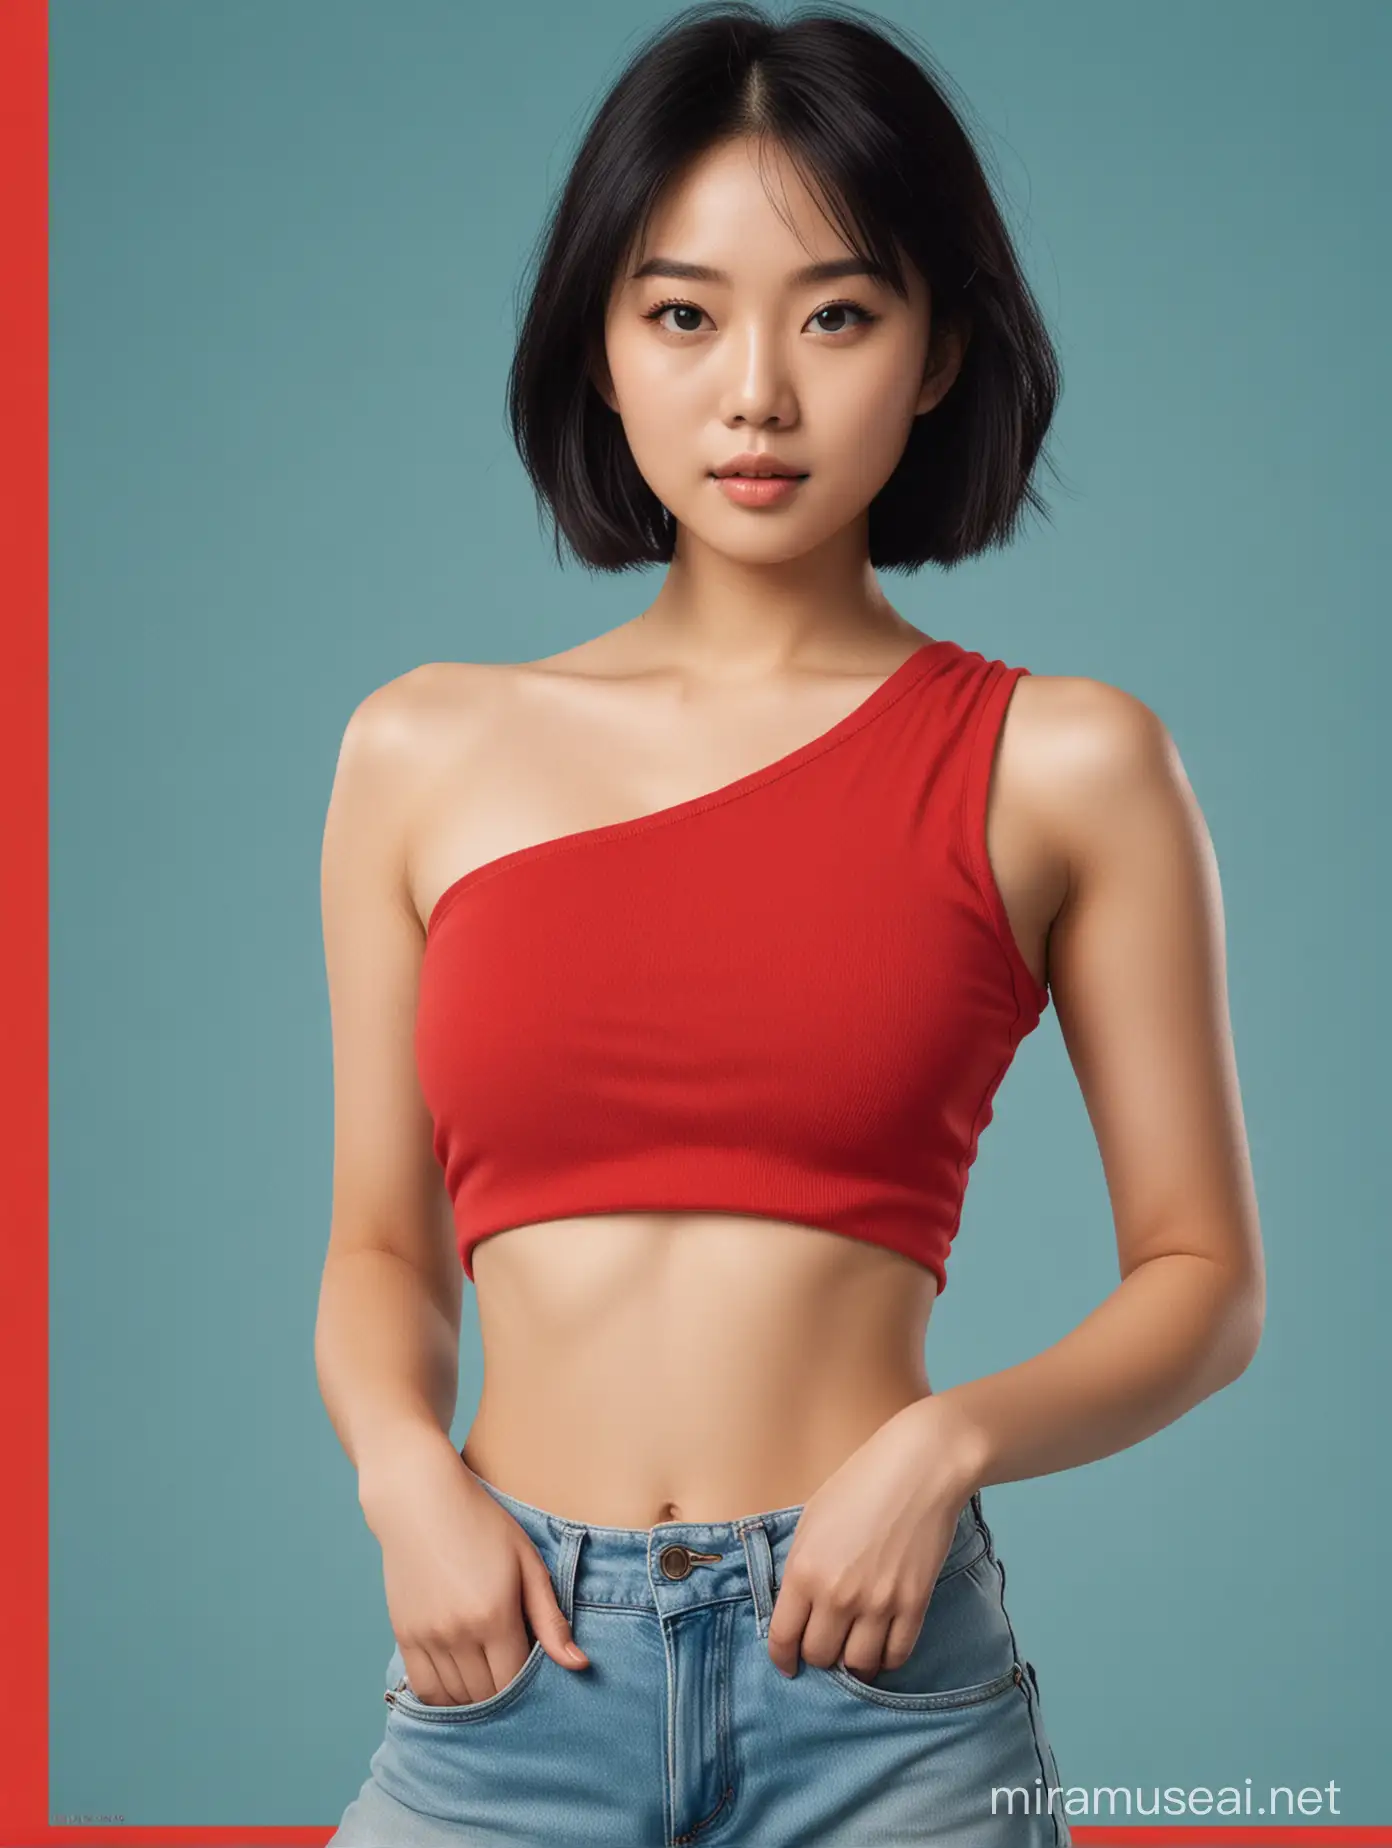 movie poster, a cool Asian girl with black straight hair. she has pale skin, She is wearing a red one-shoulder crop top that separates her abdomen and tummy from her and a pair of light blue baggy jeans, a movie poster, solid color background.